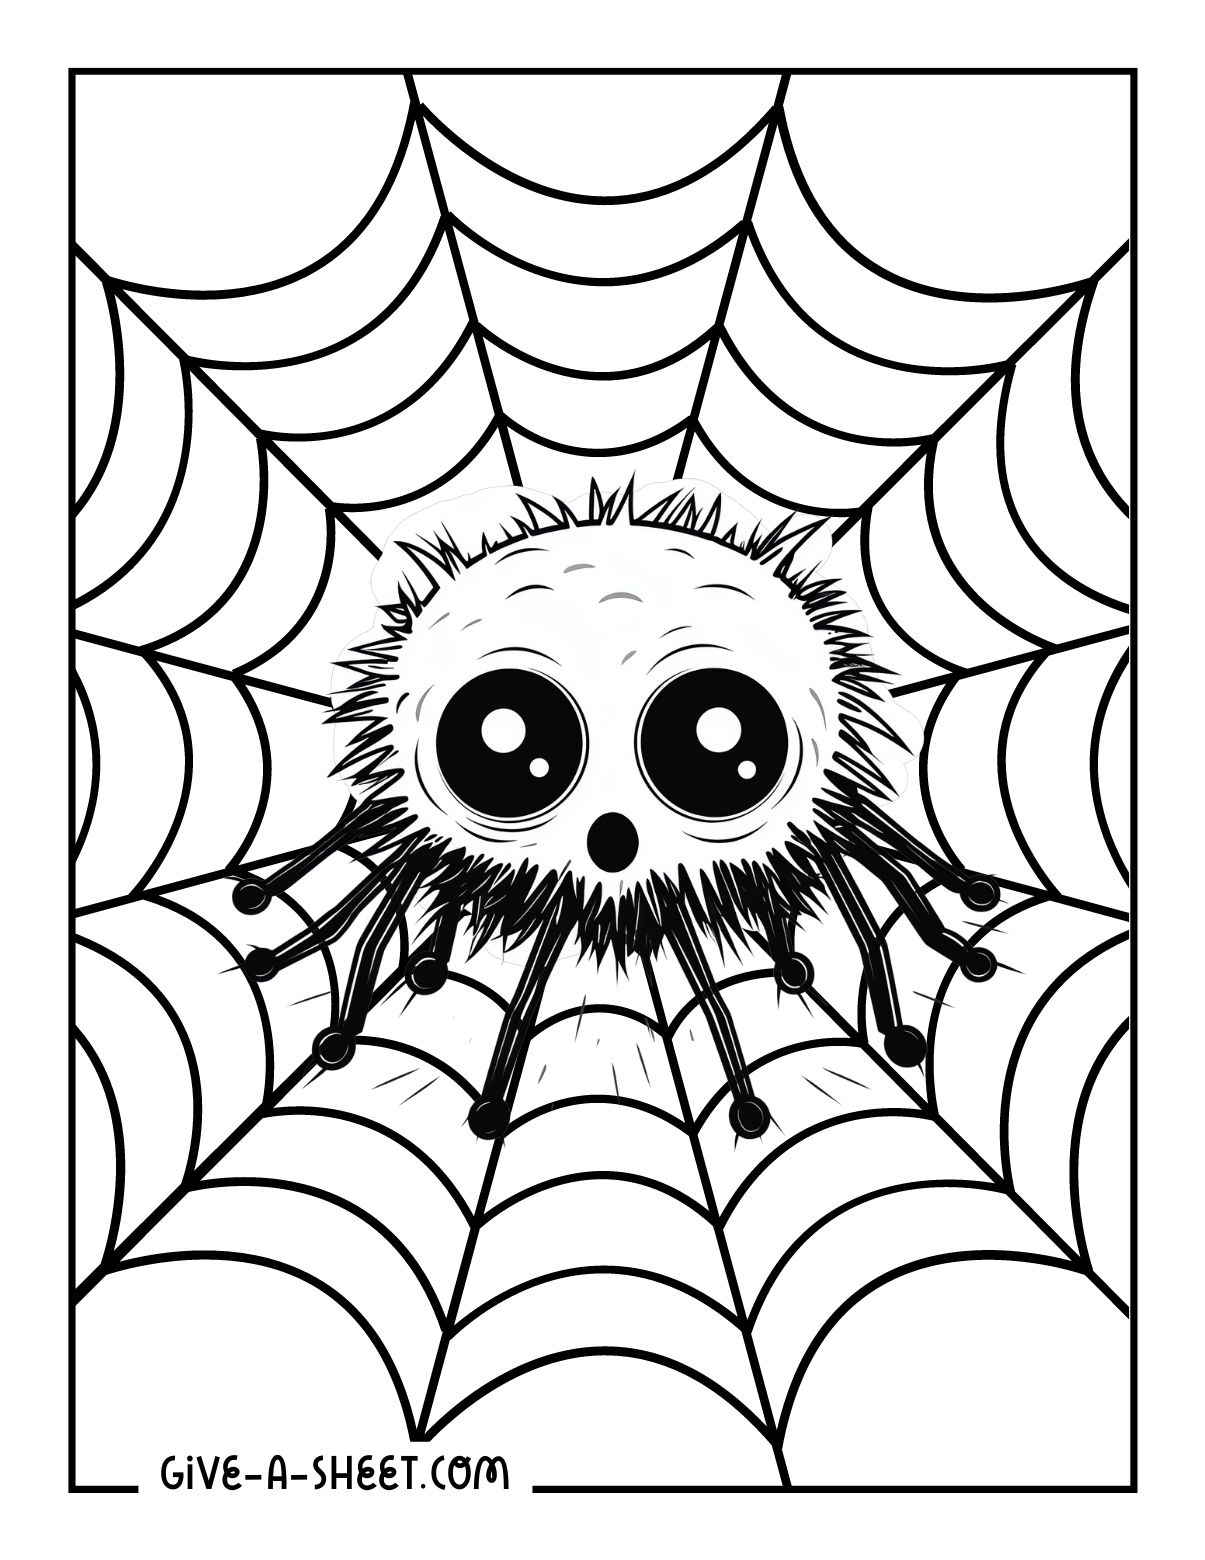 Tarantula on a spiders web new coloring pages for kids.